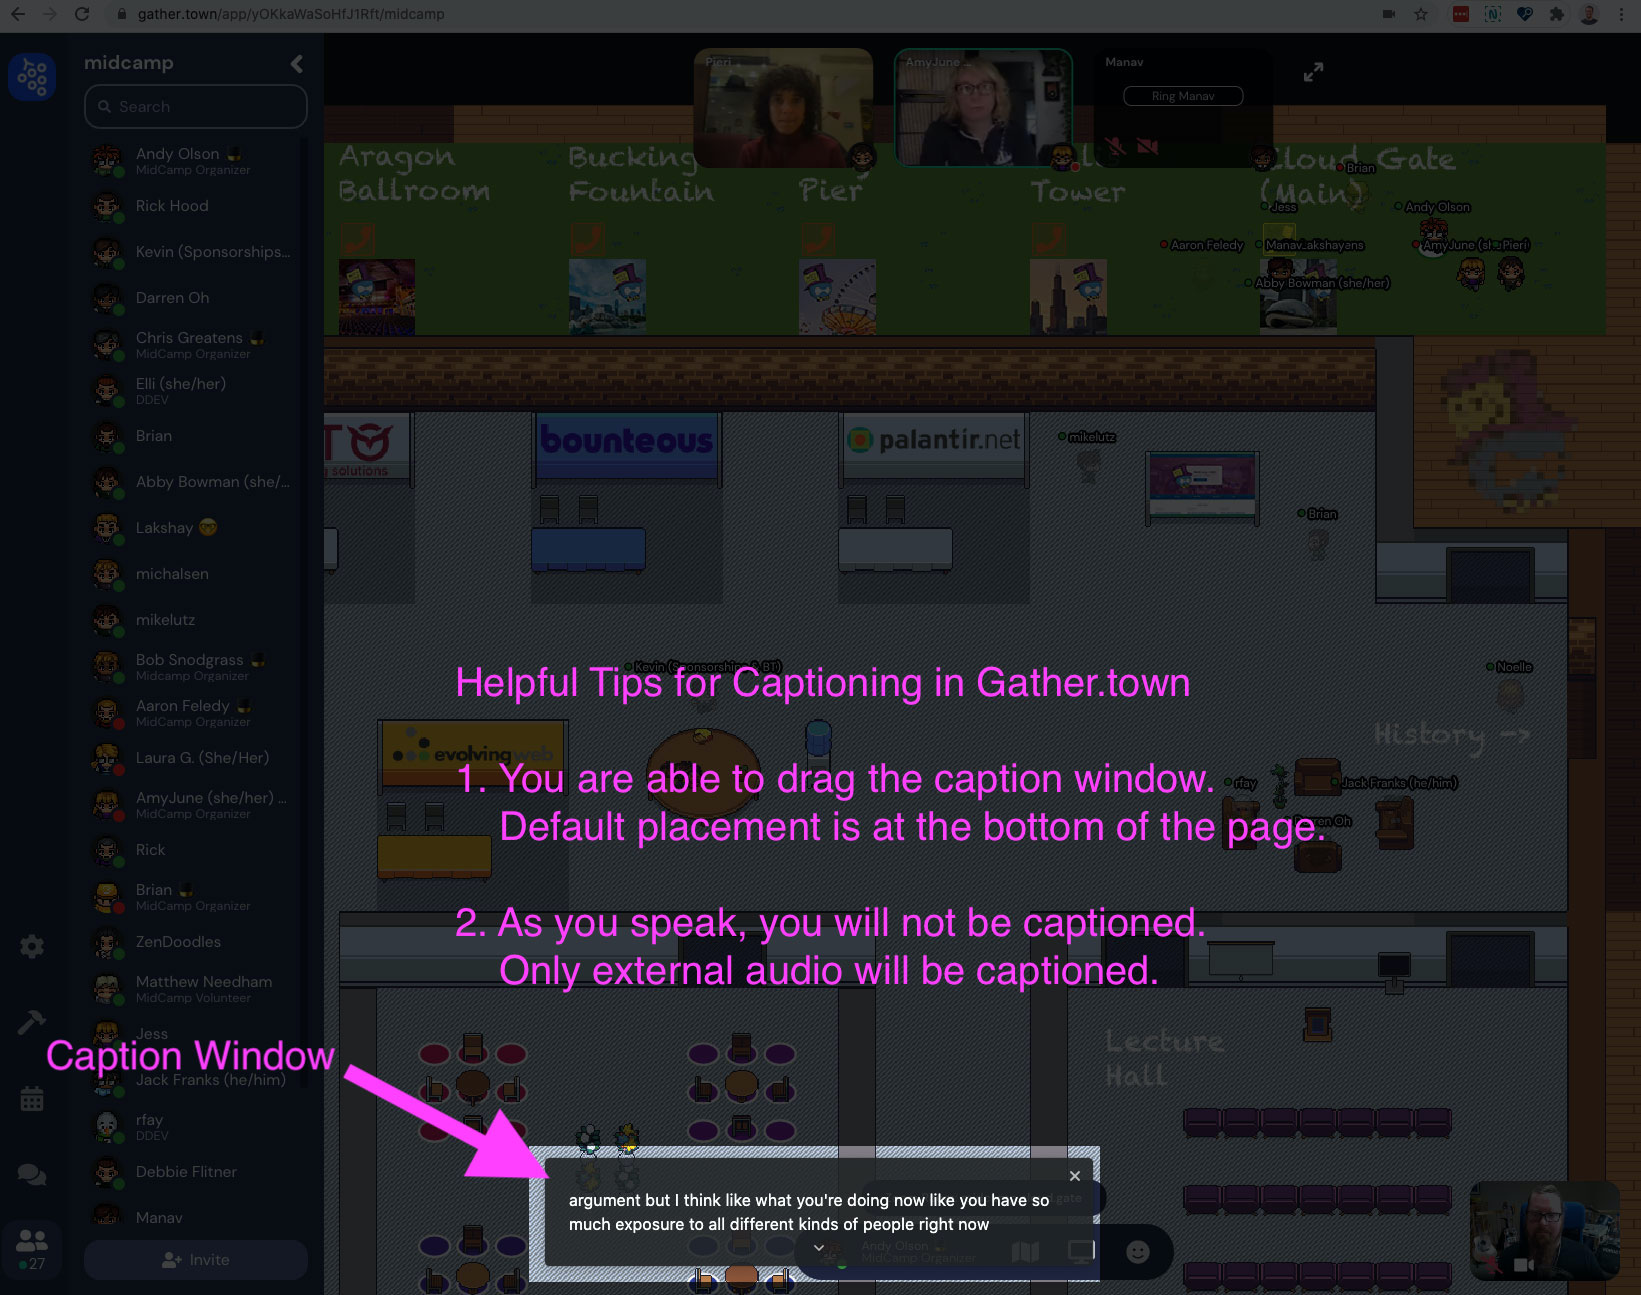 Gather.town screenshot with live captions